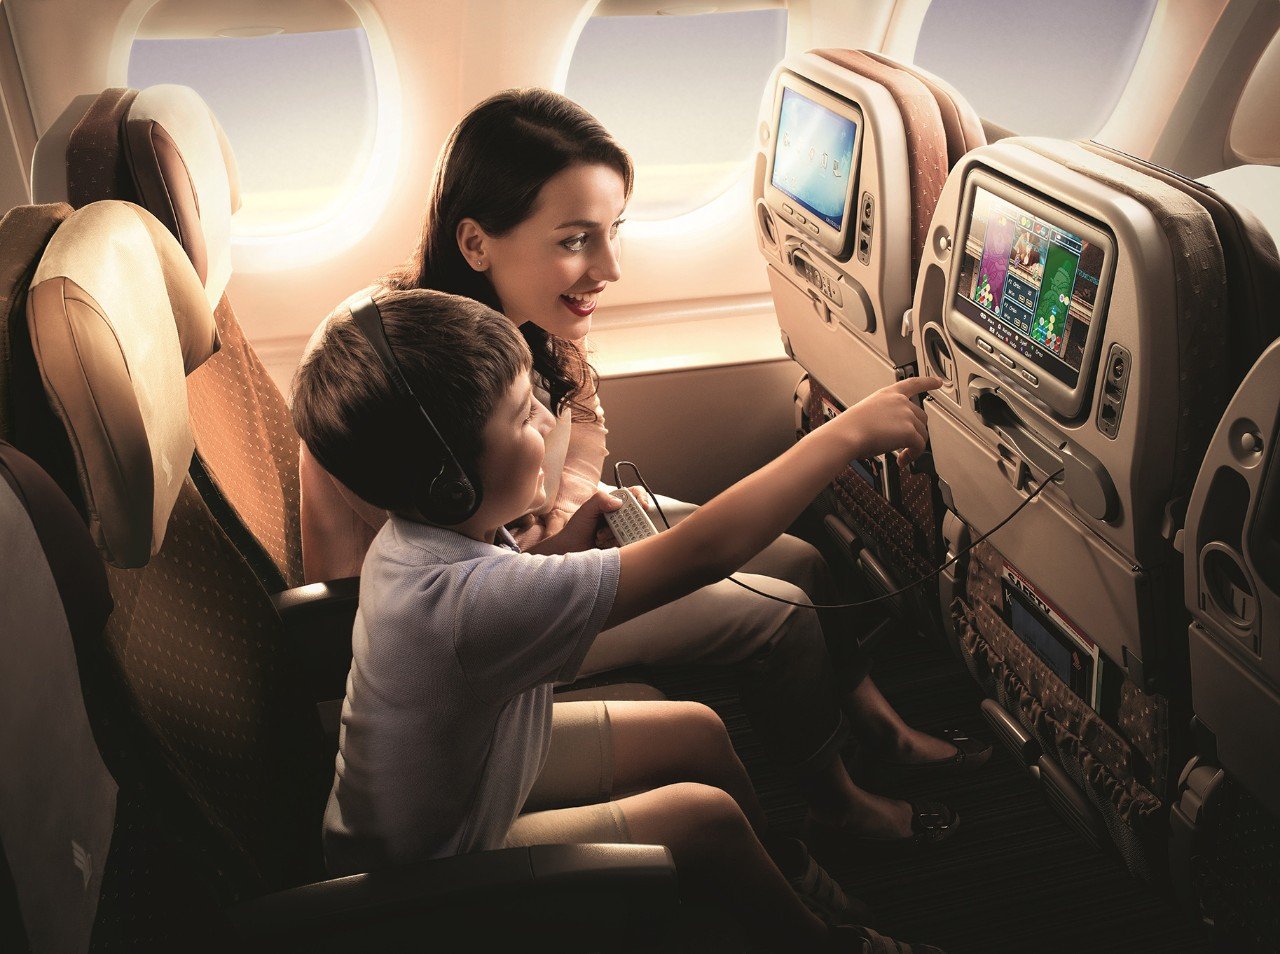 Artist's impression of Singapore Airlines A380 interior with family using IFE